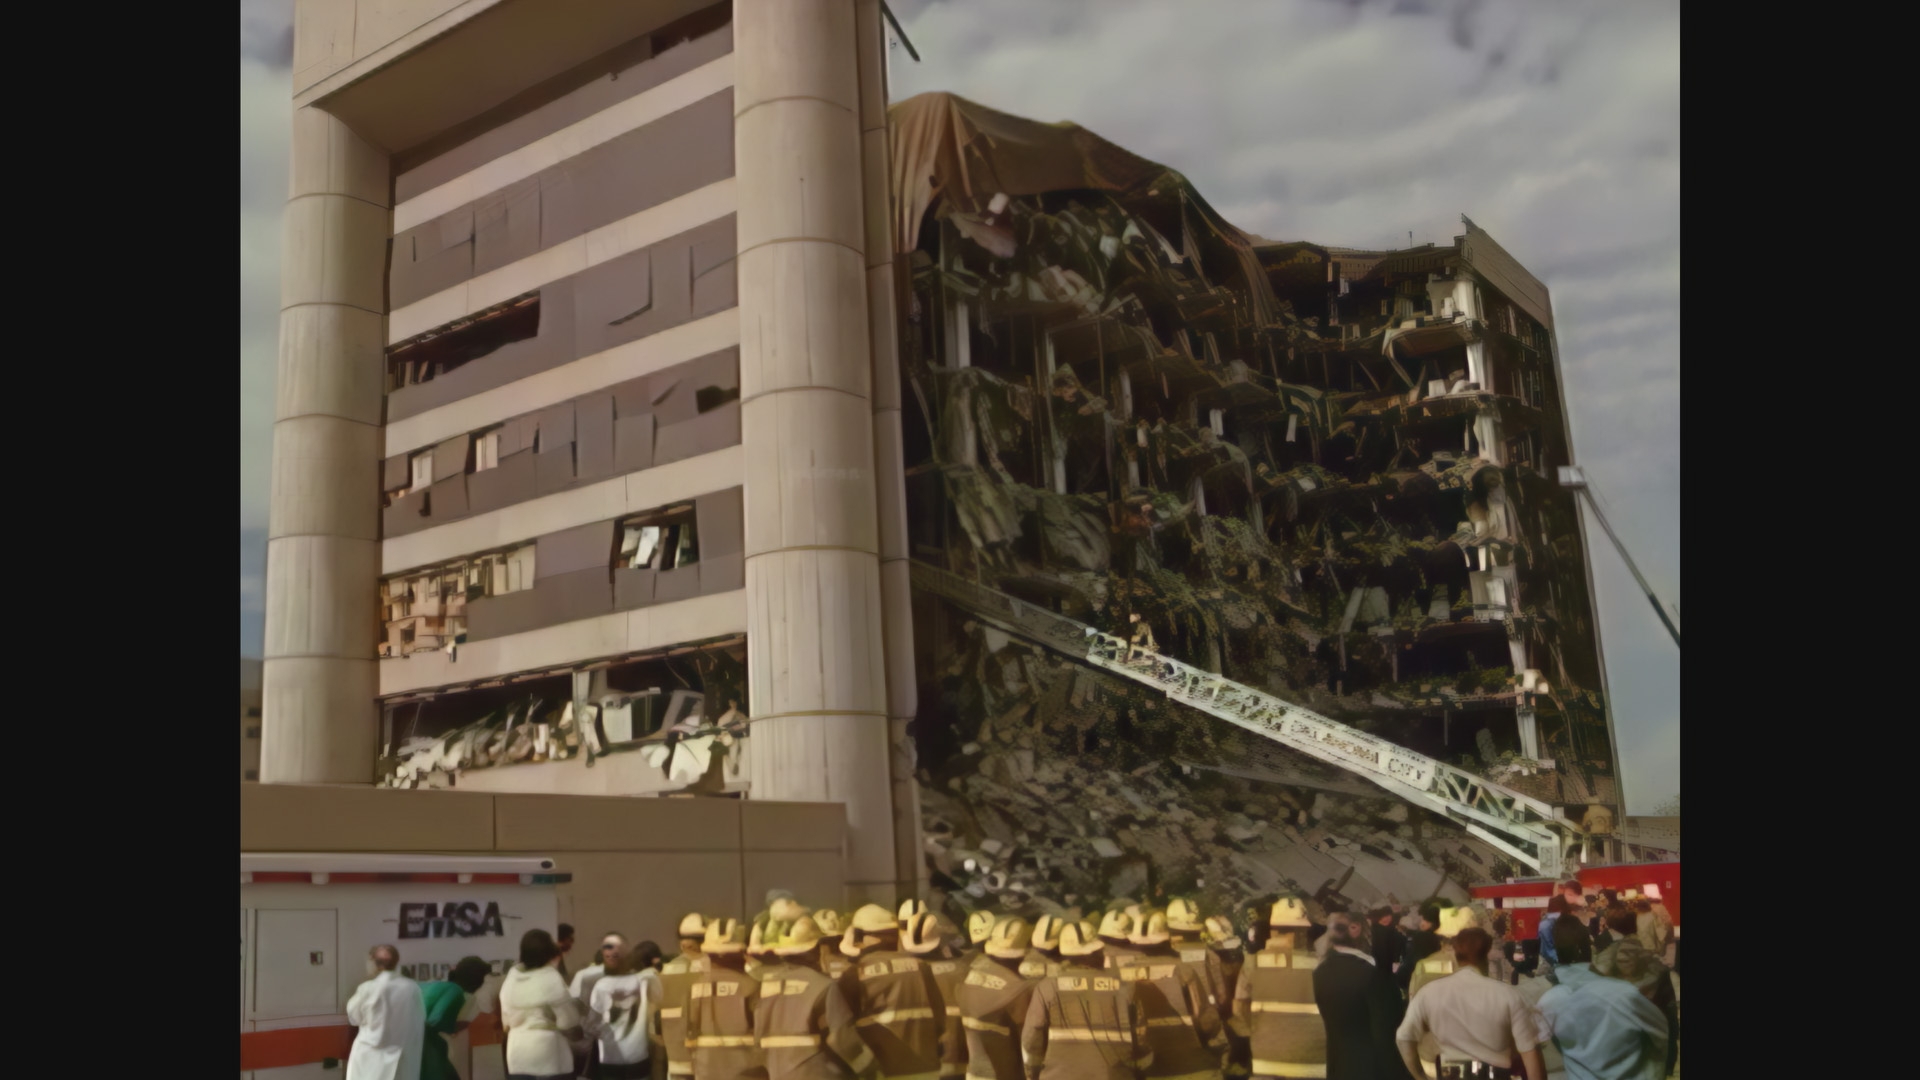 the-alfred-p-murrah-federal-building-in-oklahoma-city-on-april-19-1995